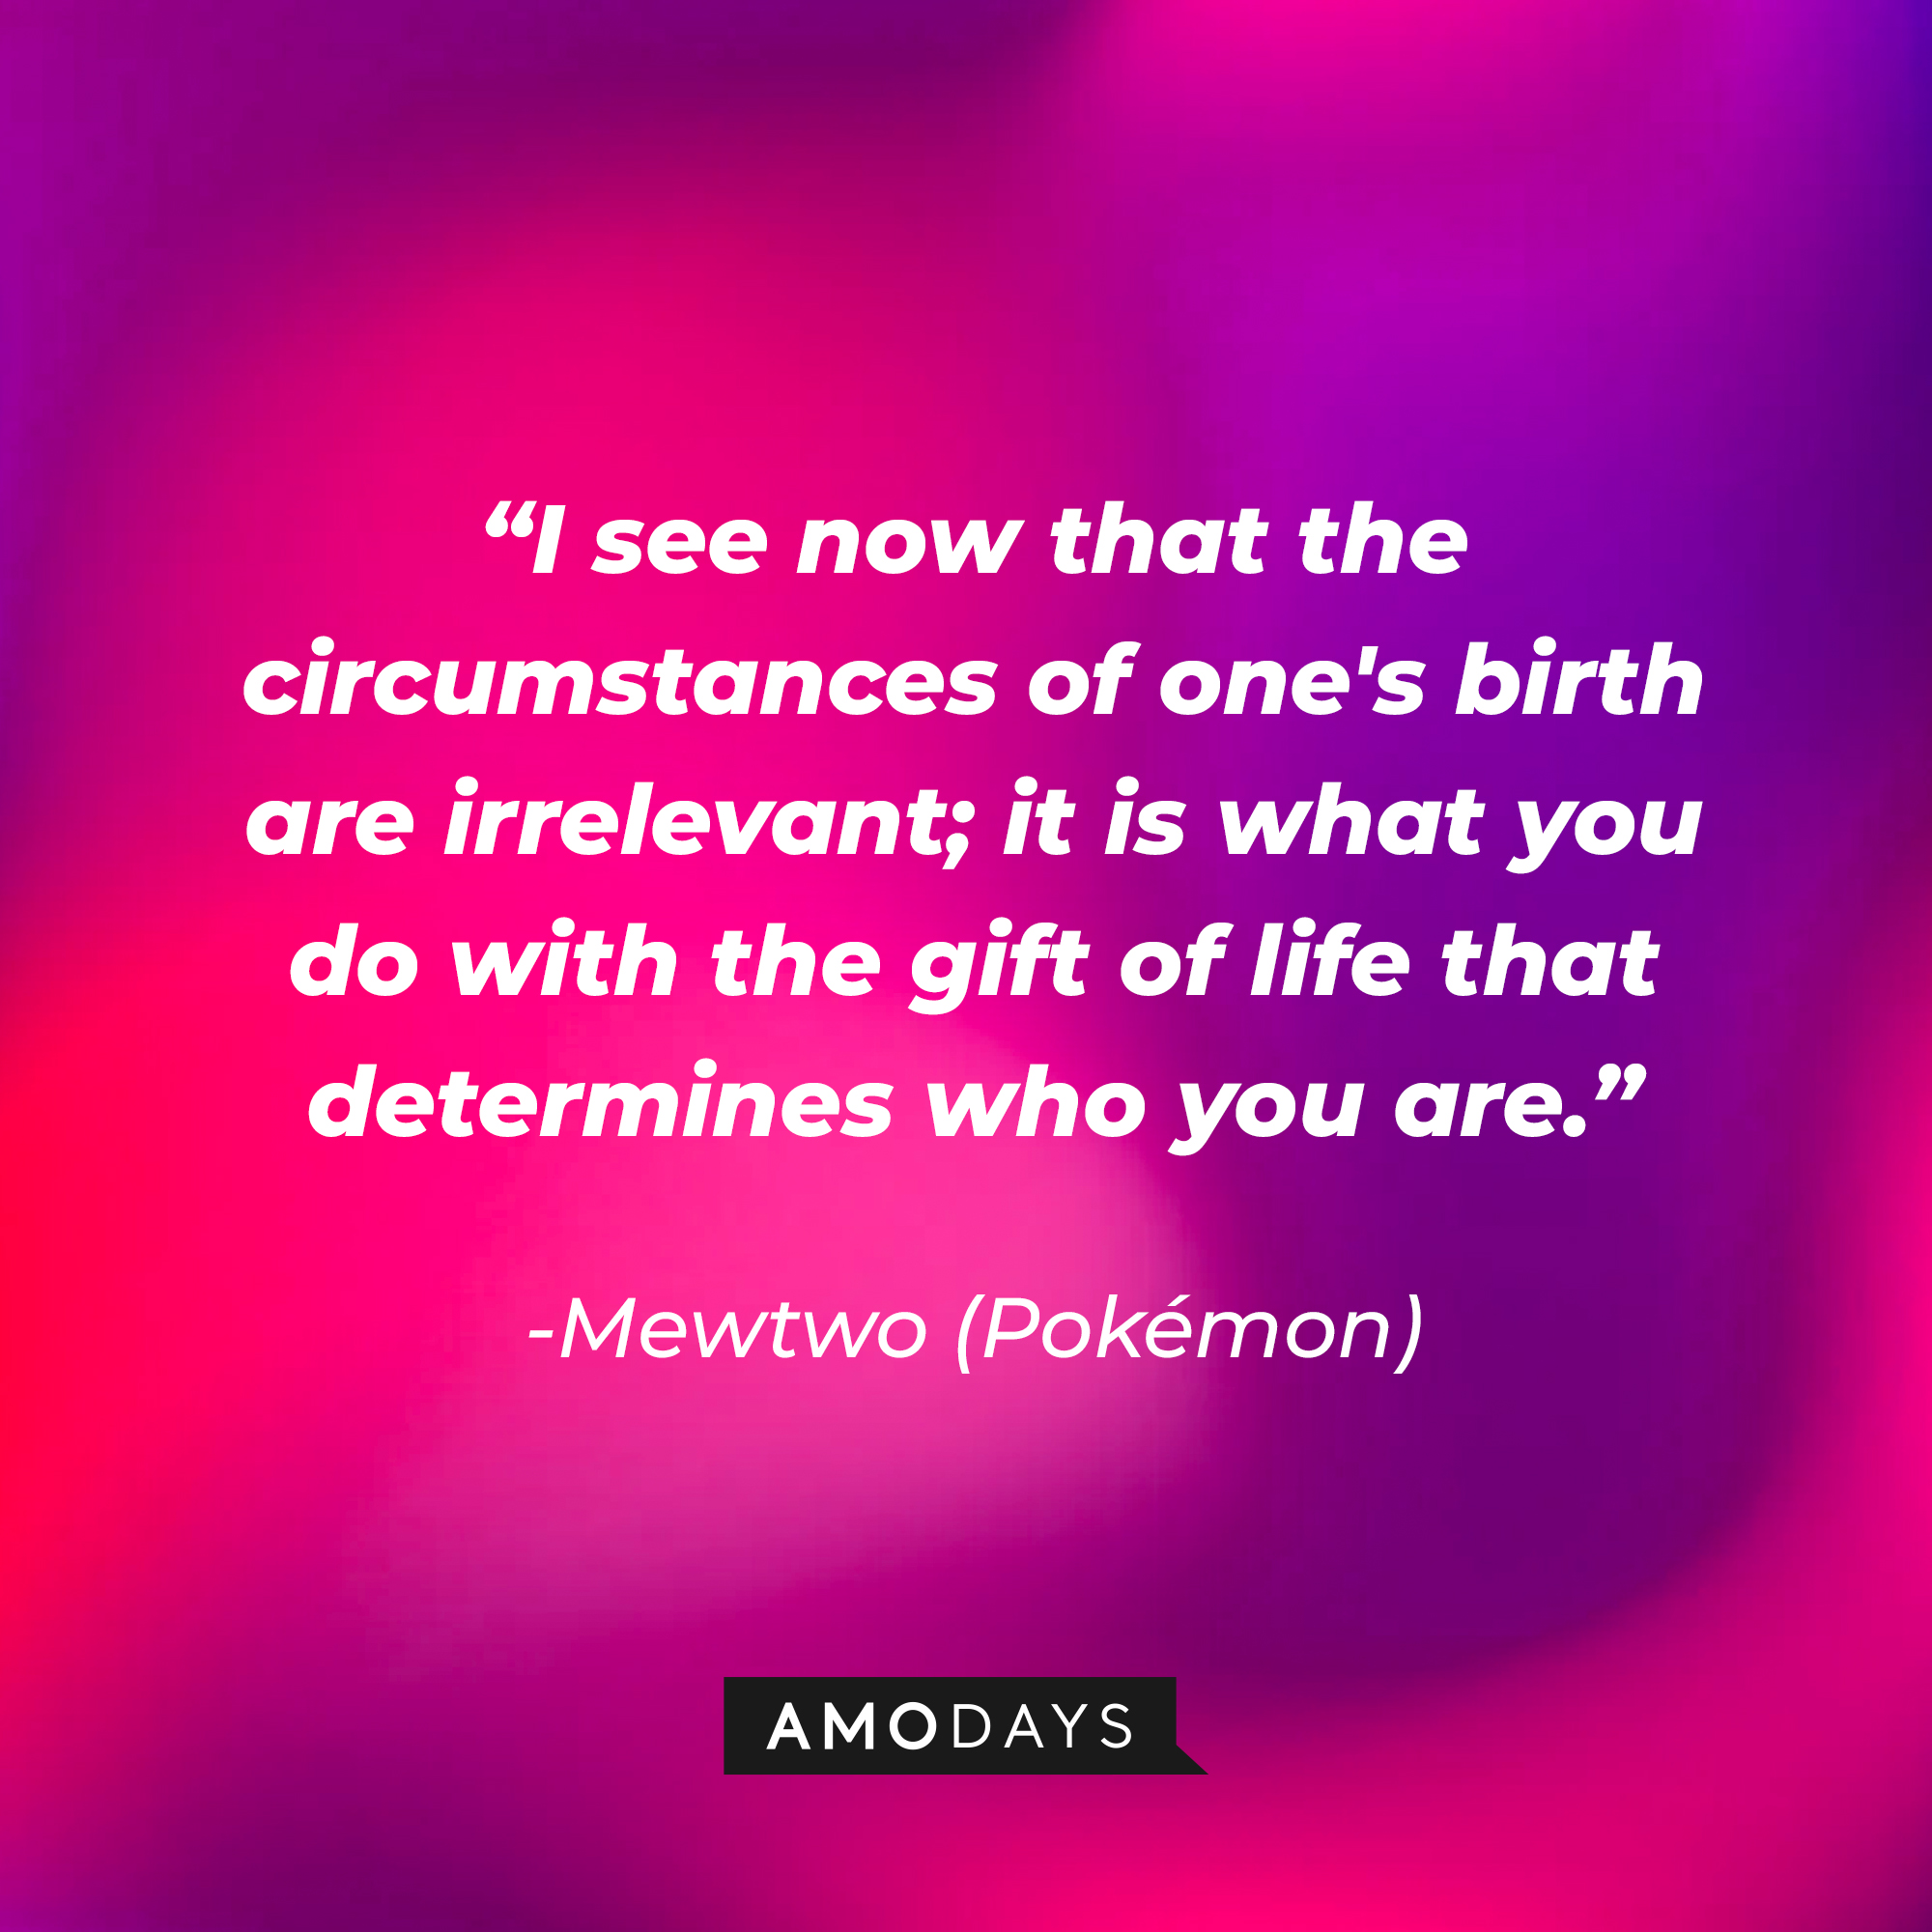 Mewtwo's quotes: "I see now that the circumstances of one's birth are irrelevant; it is what you do with the gift of life that determines who you are." | Source:Amodays